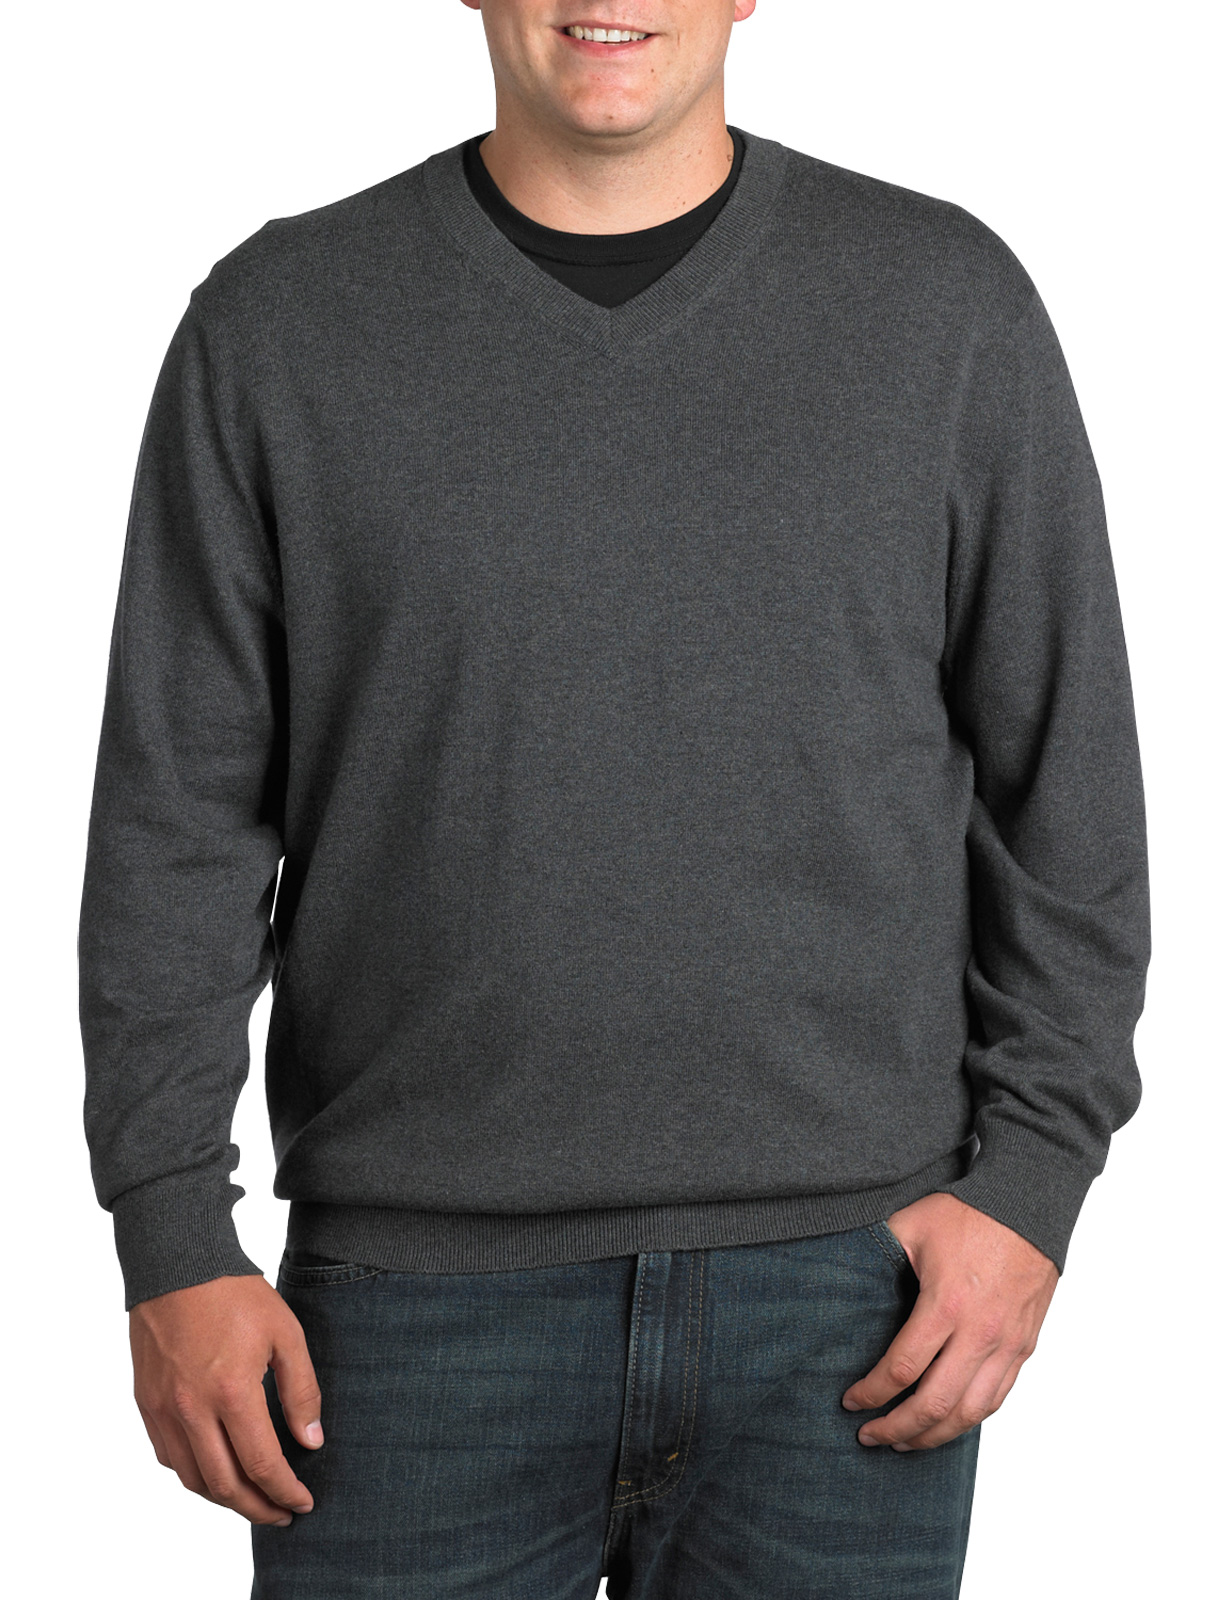 ROCHESTER Men's Big and Tall Cotton/Cashmere V-Neck Sweater